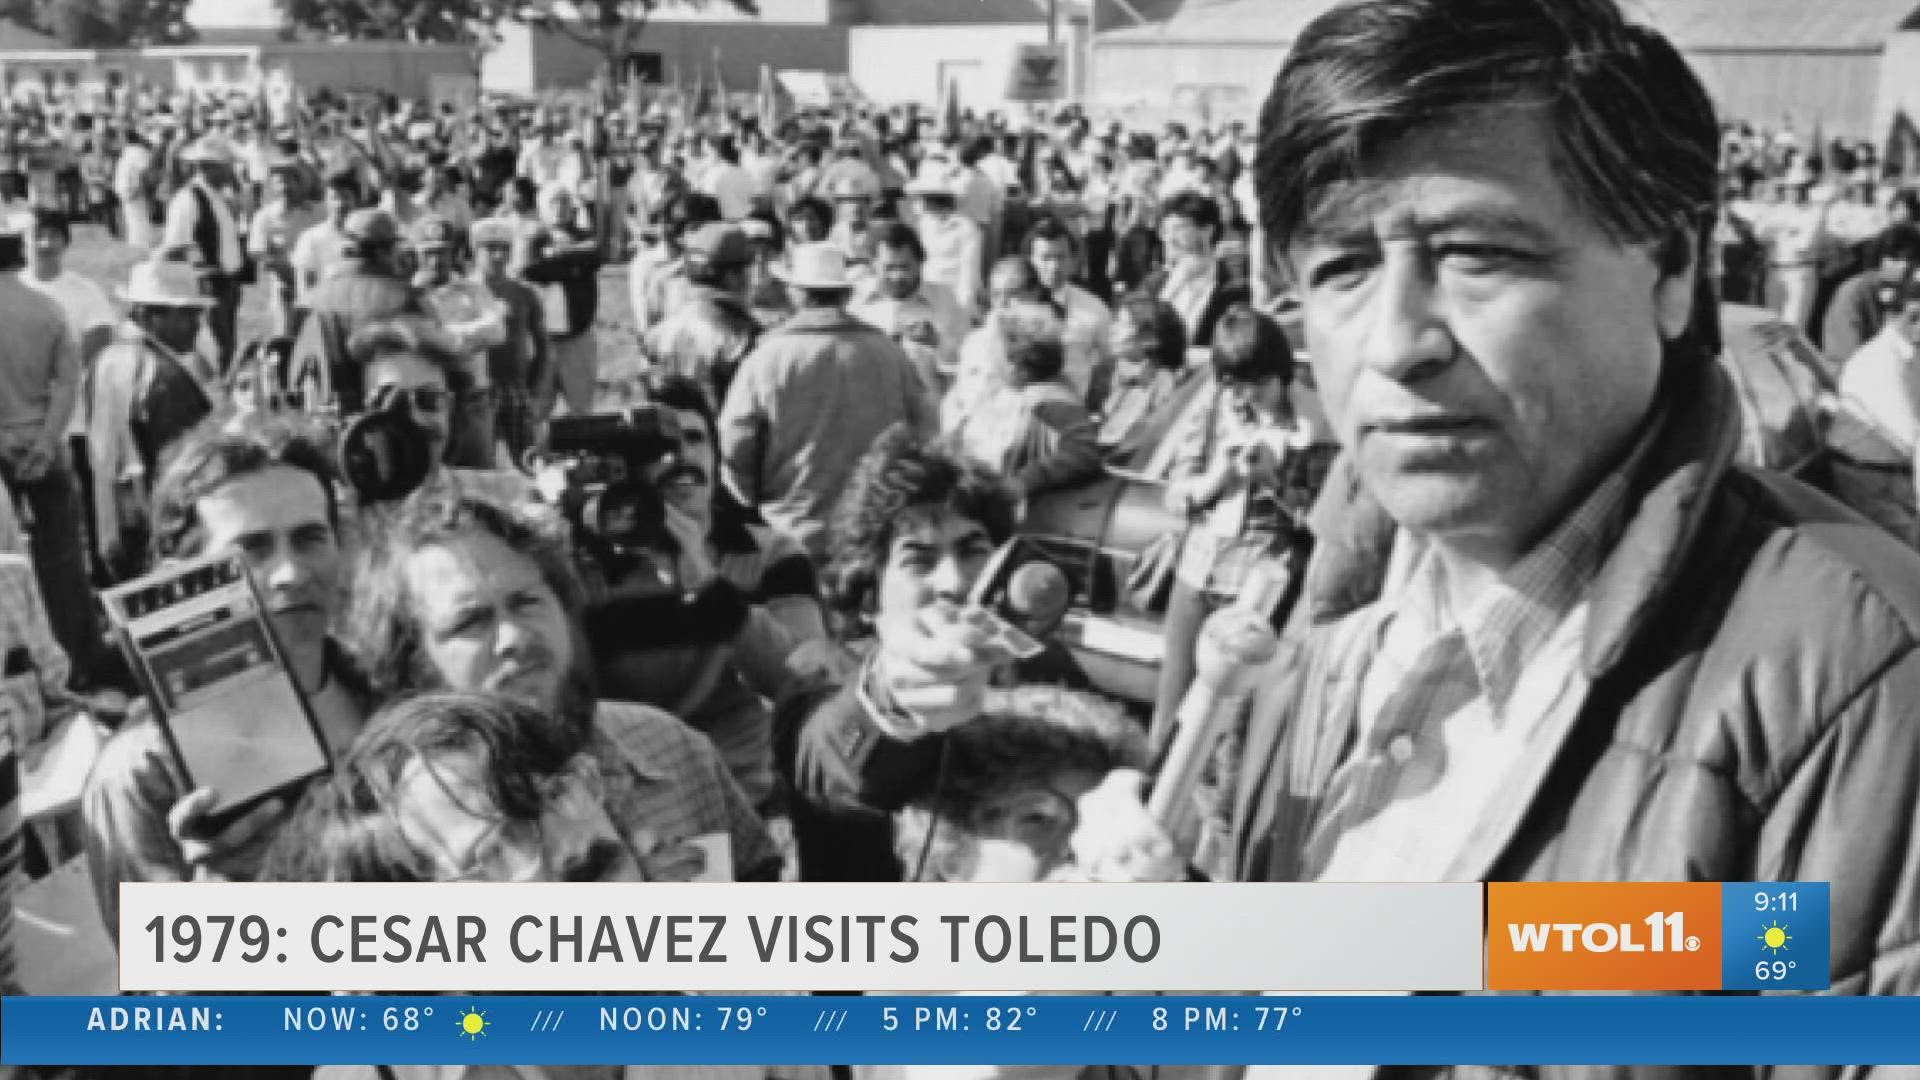 In 1979, national farm labor leader Cesar Chavez visits Toledo to congratulate Toledo's Farm Labor Organizing Committee (FLOC) for its efforts.